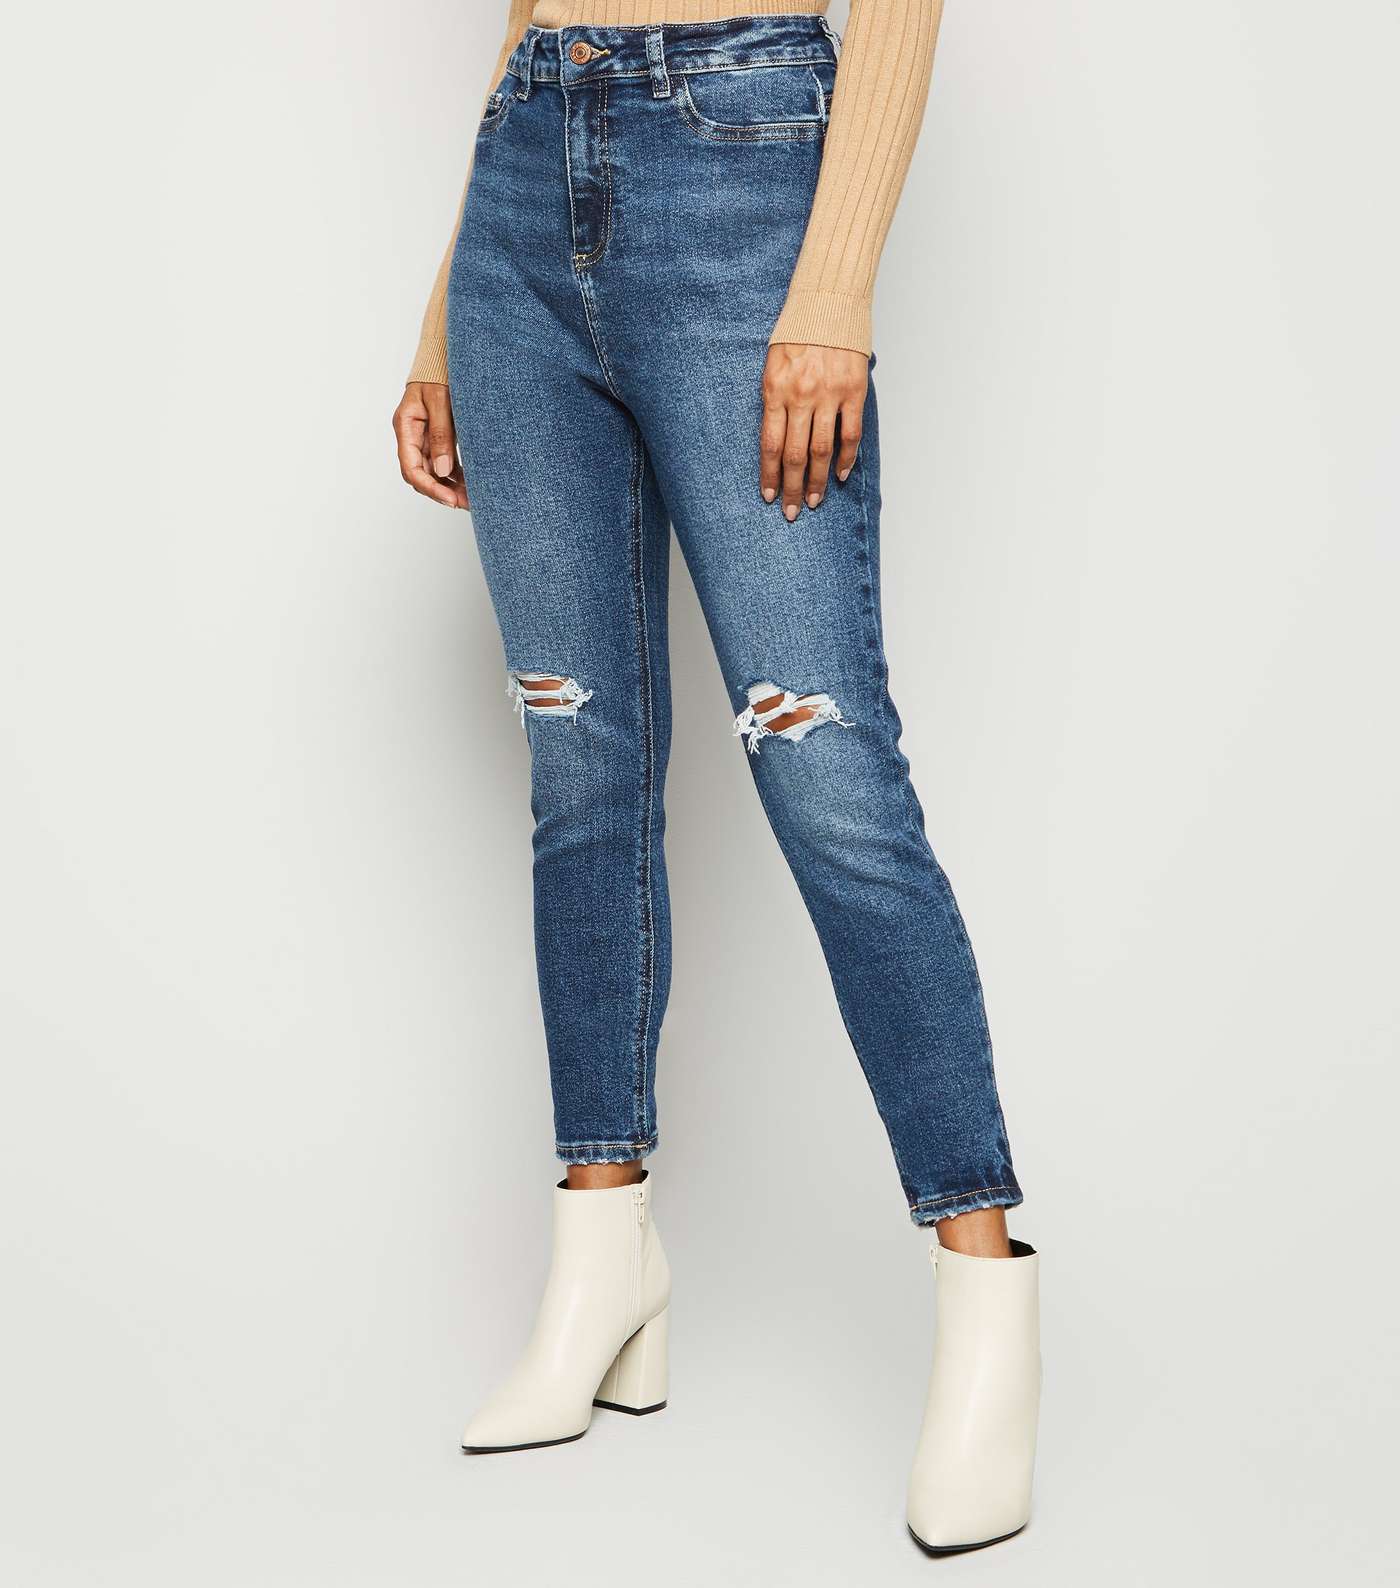 Petite Blue Rinse Wash Ripped High Waist Super Skinny Jeans Image 2